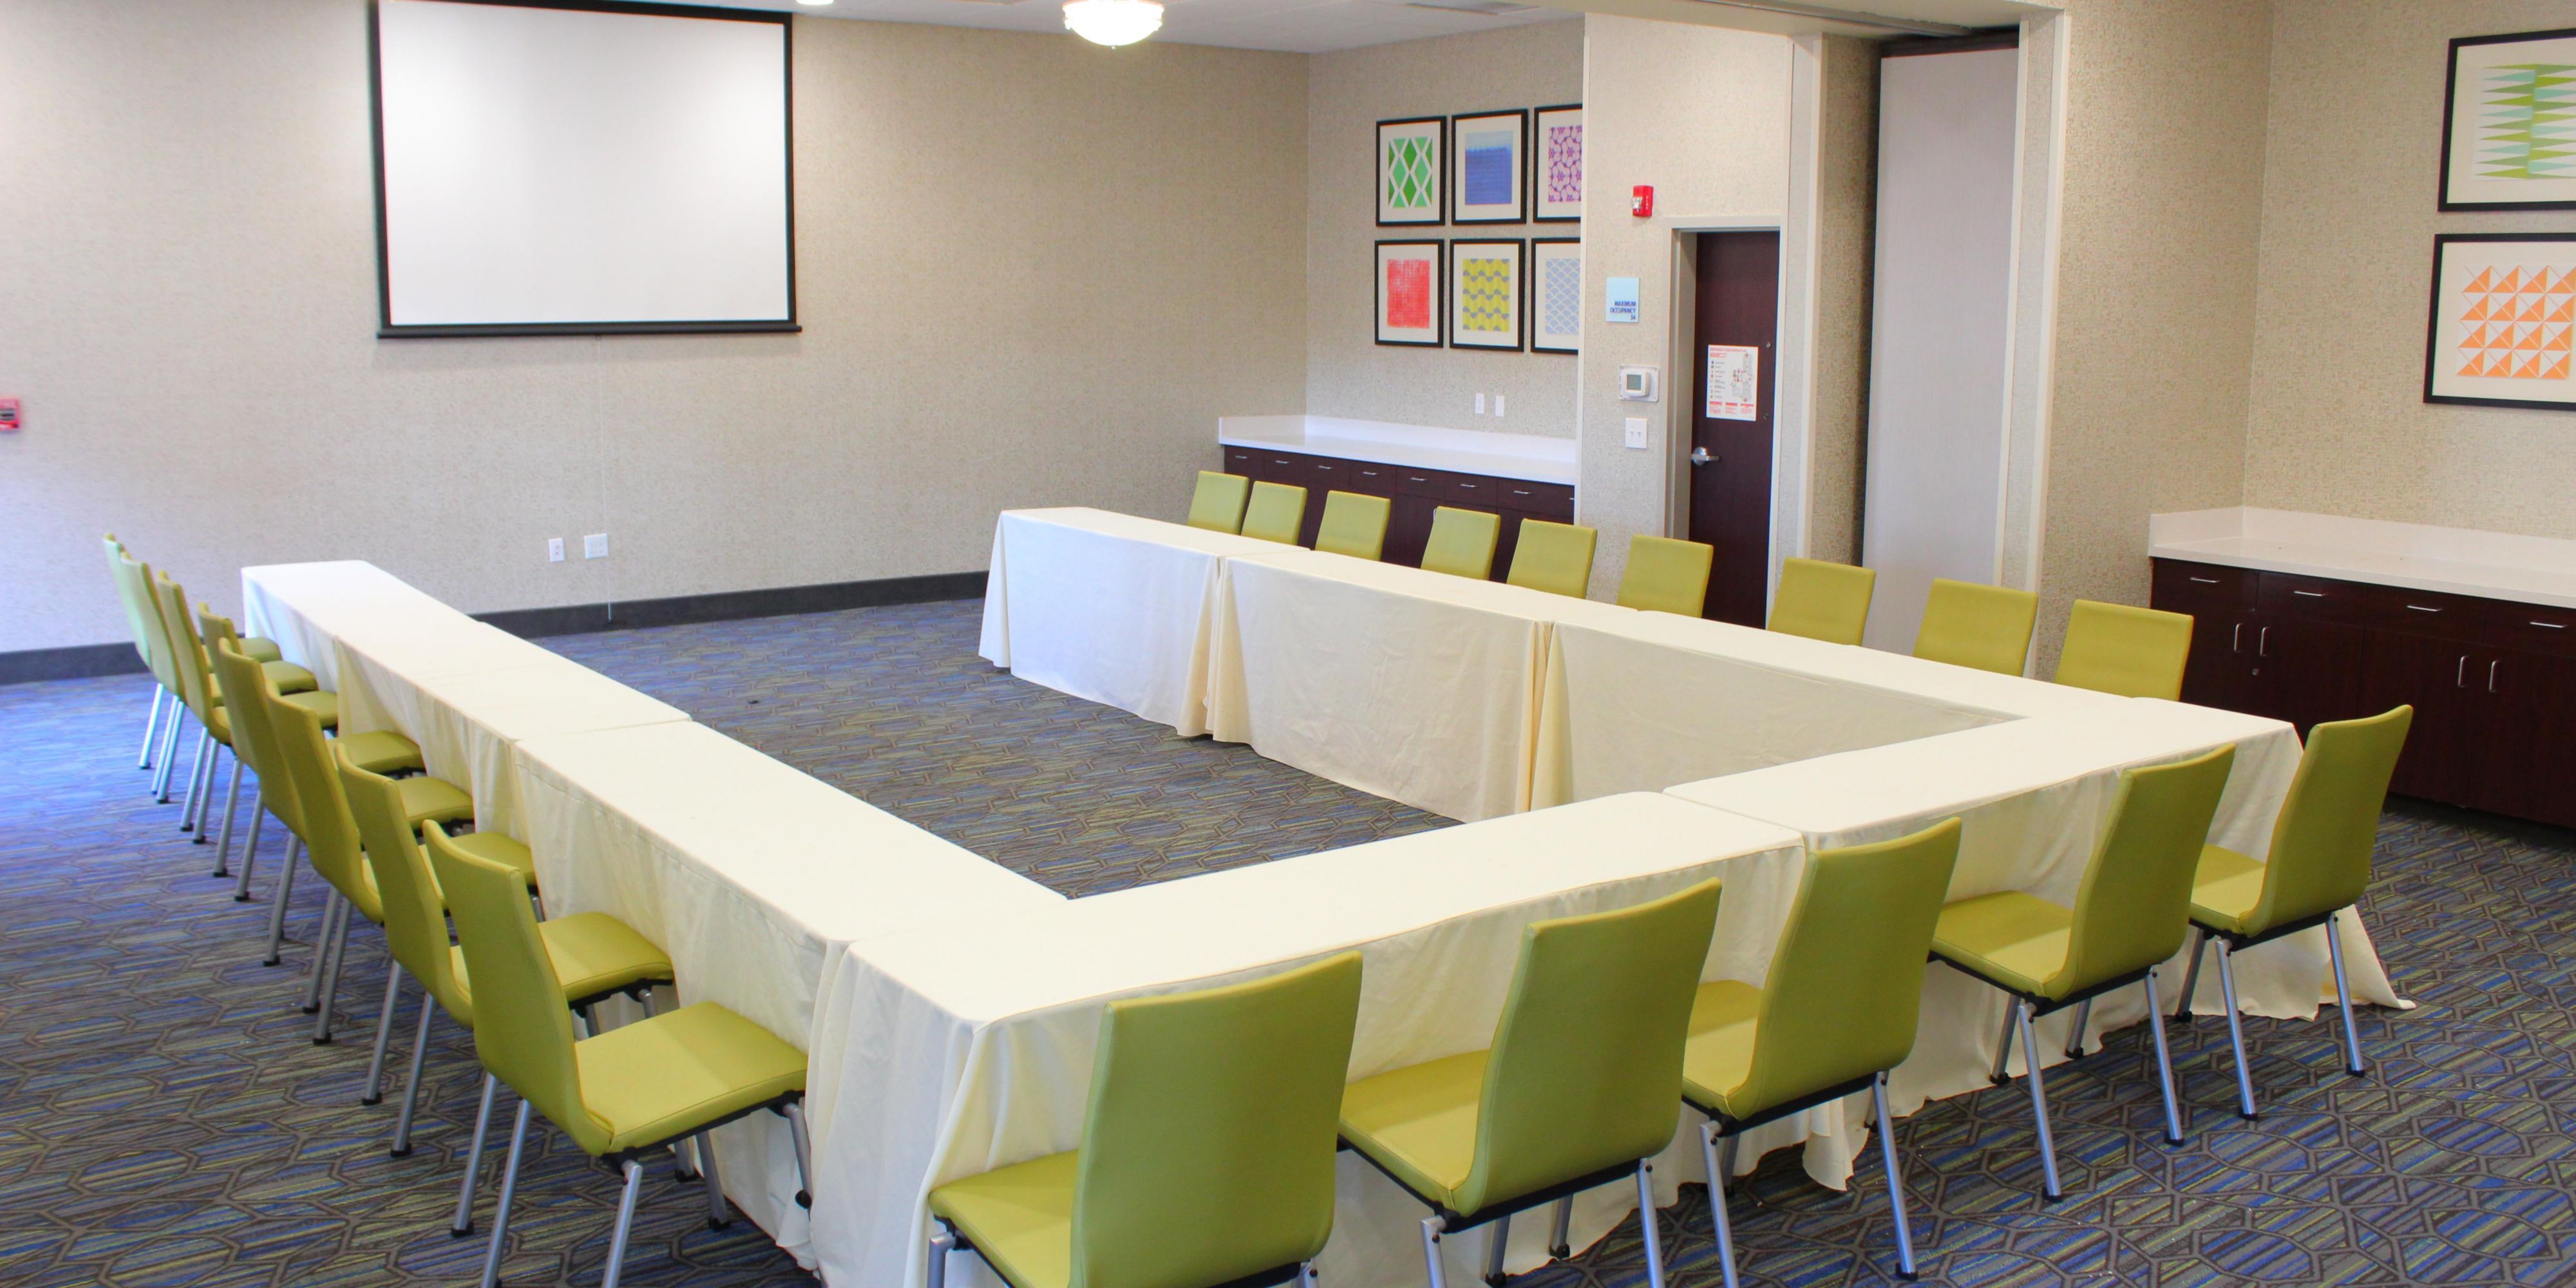 Our hotel has two 850 square feet of meeting space available with a capacity of 60 guests per room.  This space is best utilized for small parties, corporate meetings, team luncheons and many more! Contact our Sales Department for more information at (707) 552-8100 extension#2. 